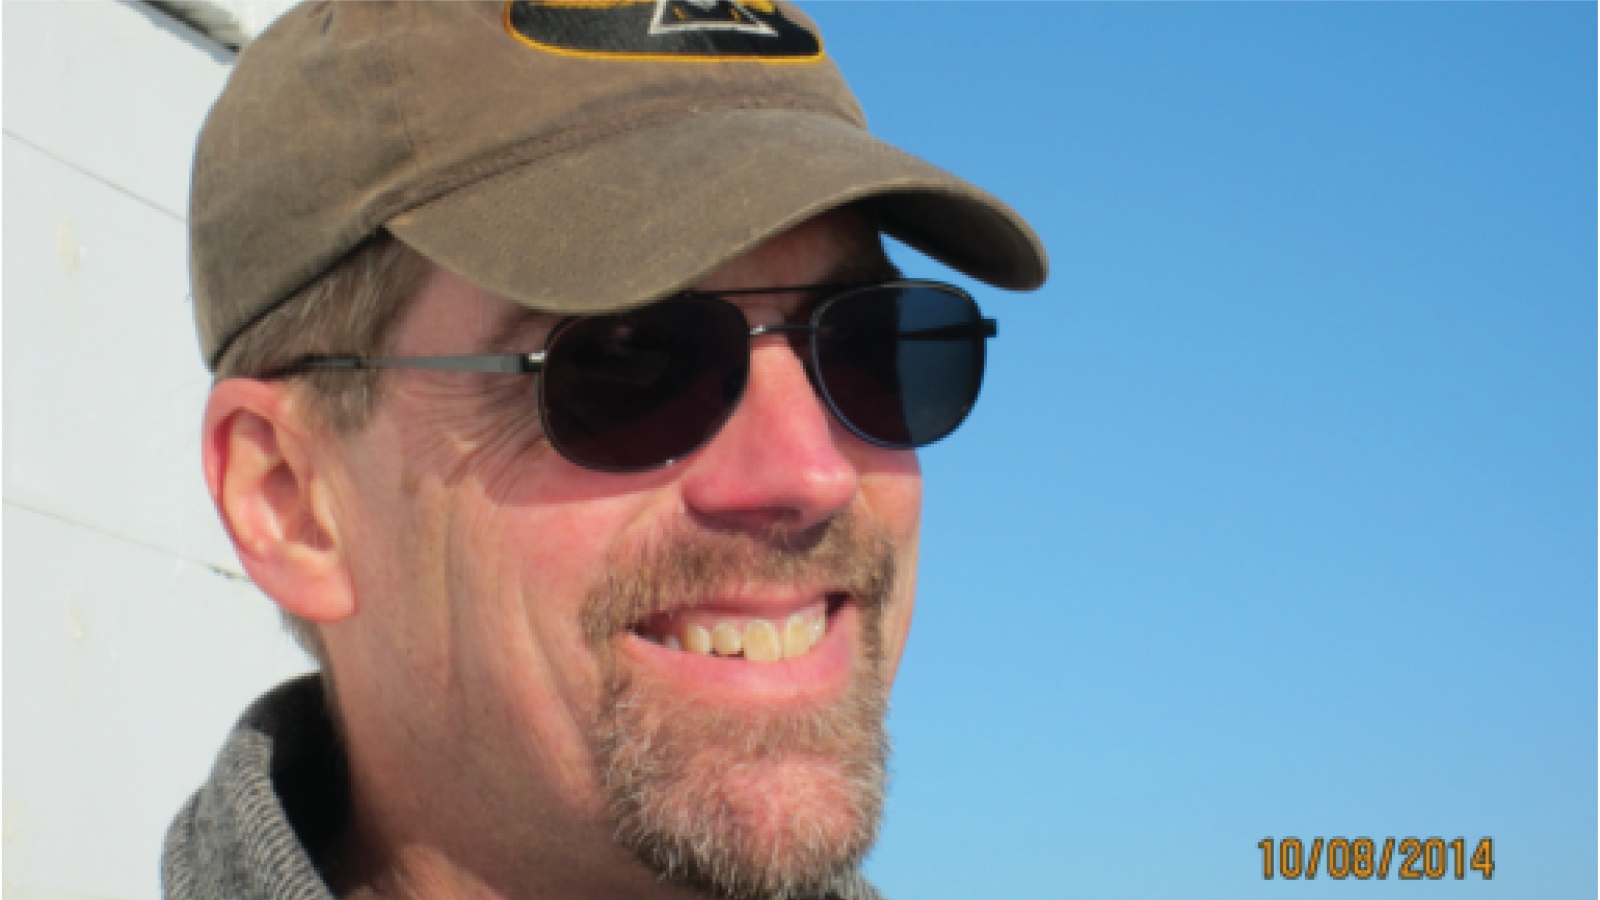 Jeff DeFreest wearing a hat and aviator sunglasses